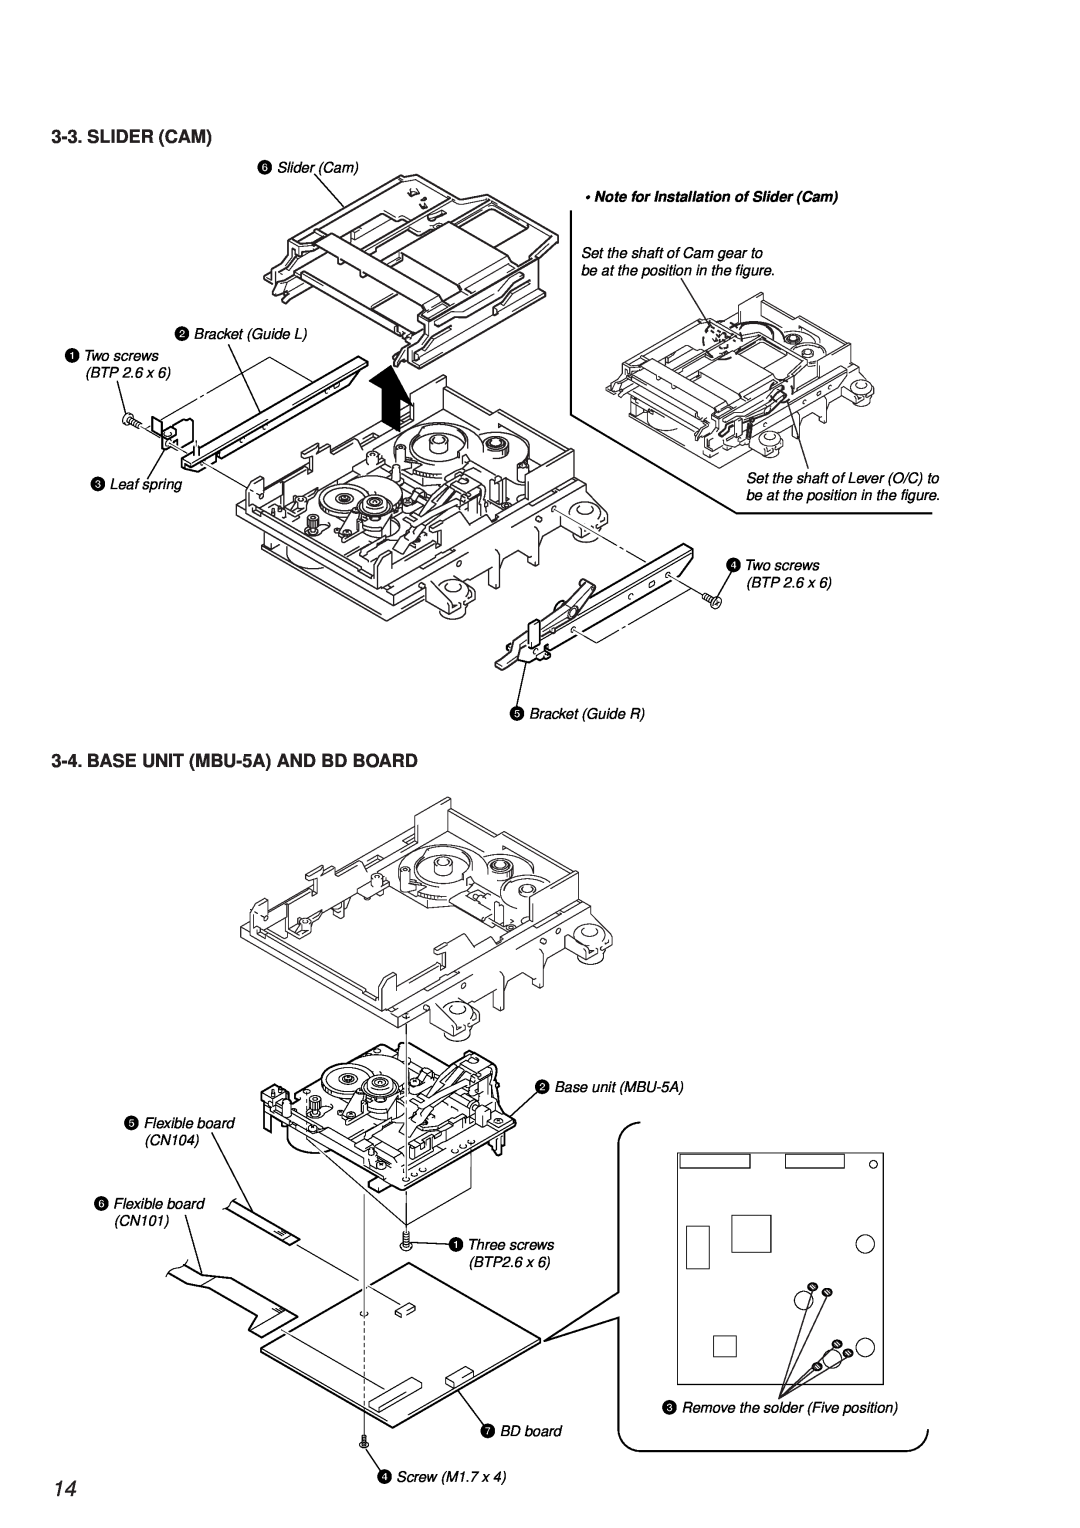 Sony MDS-PC2 service manual BASE UNIT MBU-5AAND BD BOARD, Note for Installation of Slider Cam 